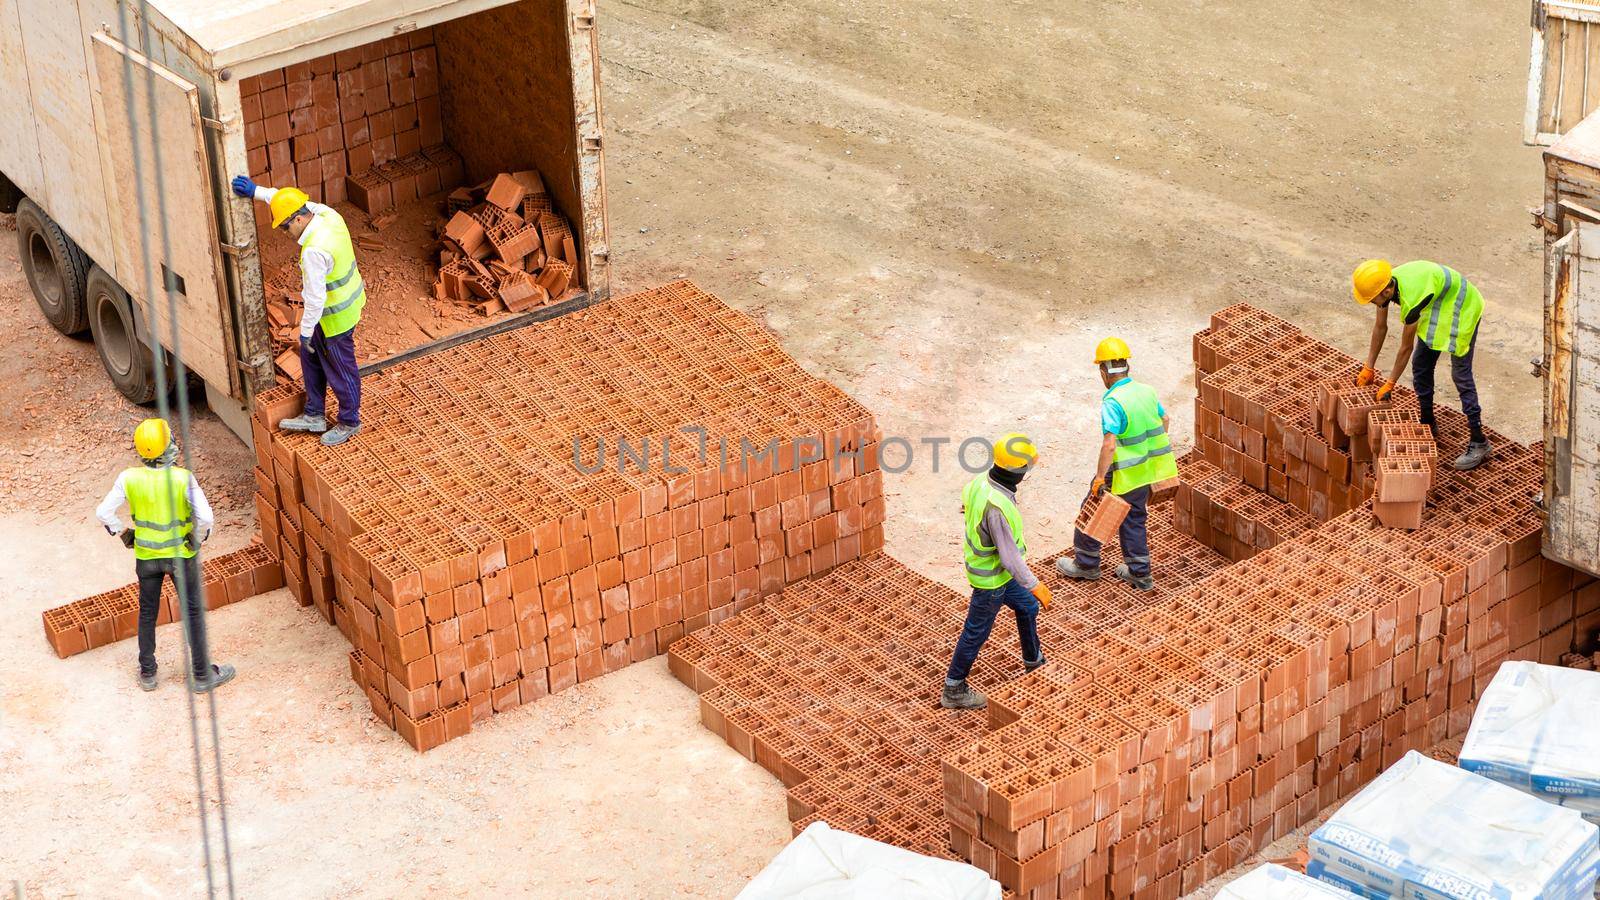 Construction workers unloading bricks, working on construction site by ferhad